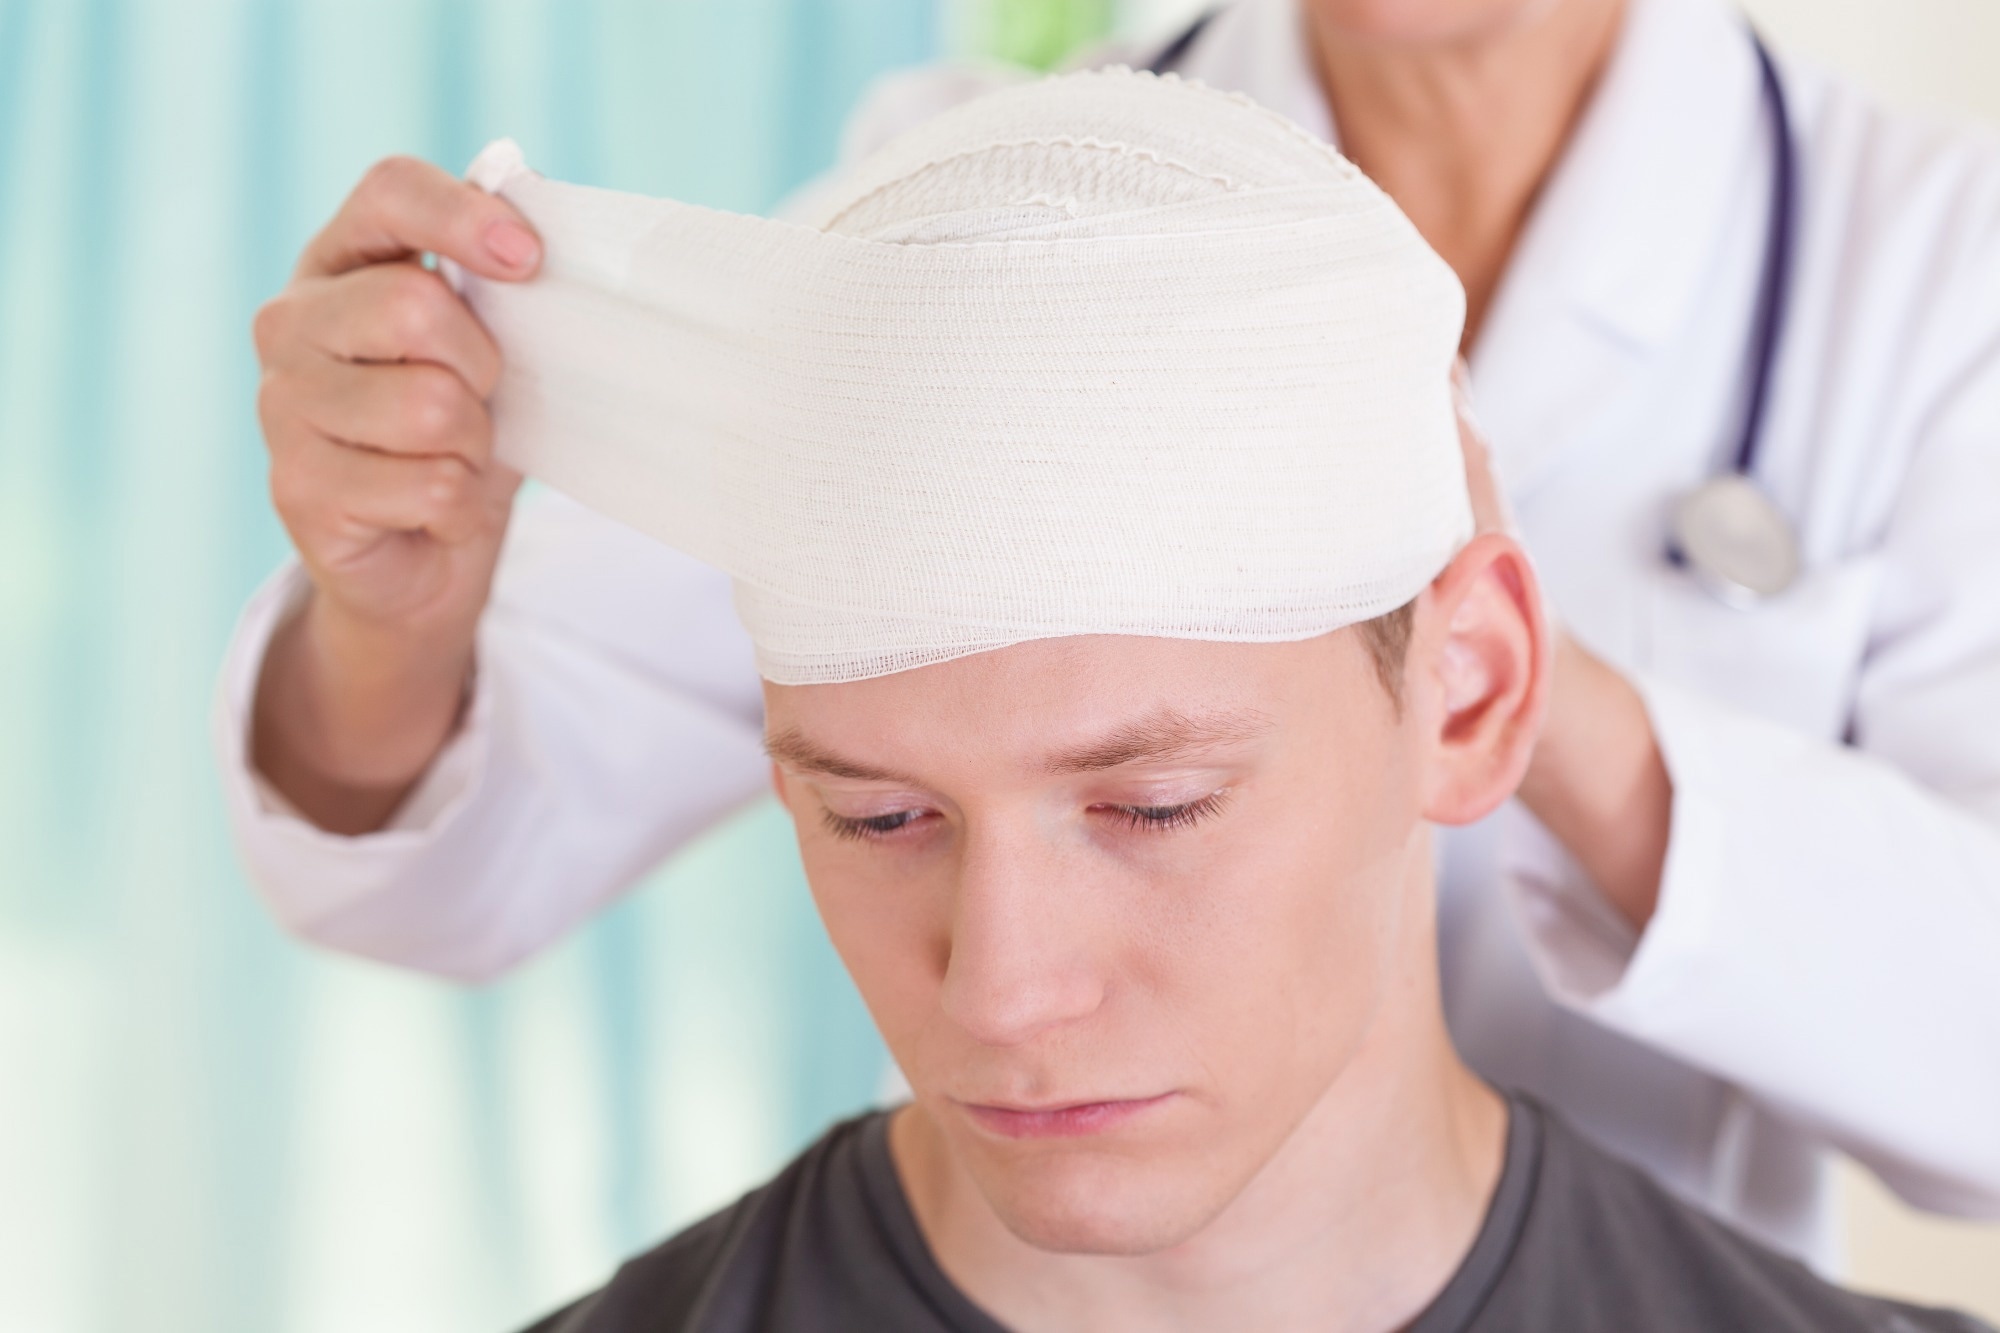 Study: Epidemiology of head injuries in pedestrian-motor vehicle accidents. Image Credit: ESB Professional/Shutterstock.com